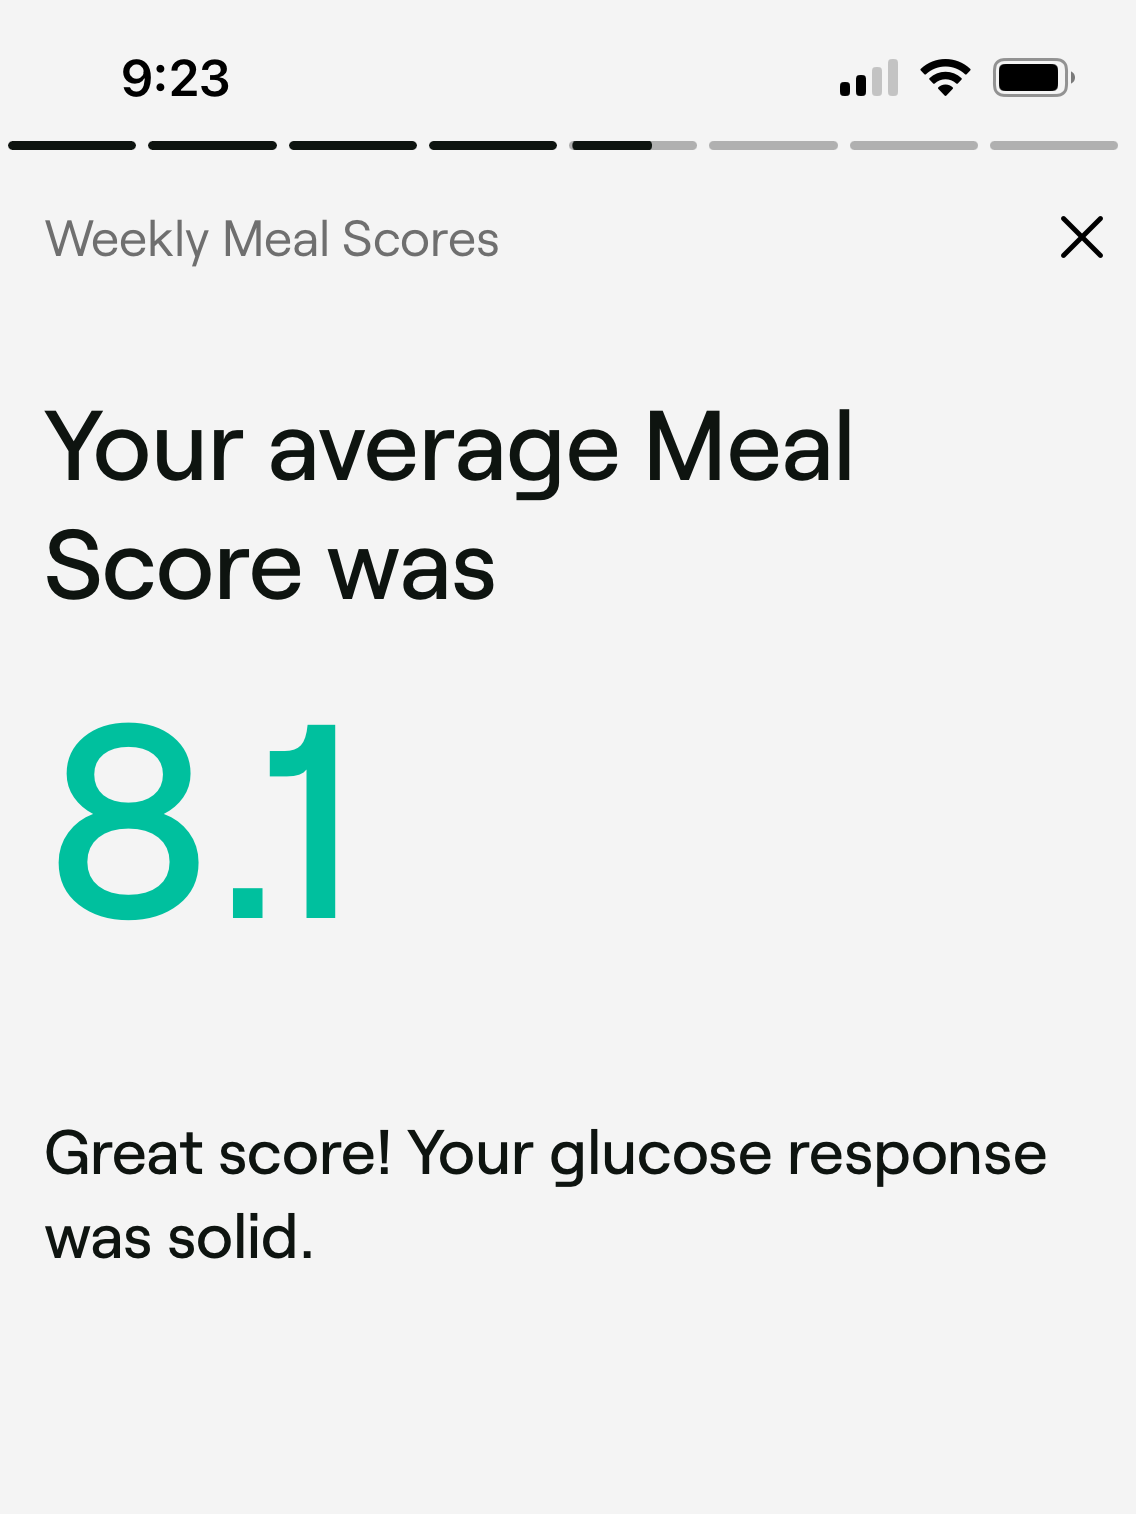 A screenshot of a mobile application displaying a weekly meal score of 8.1 with a congratulatory message "great score! your glucose response was solid.